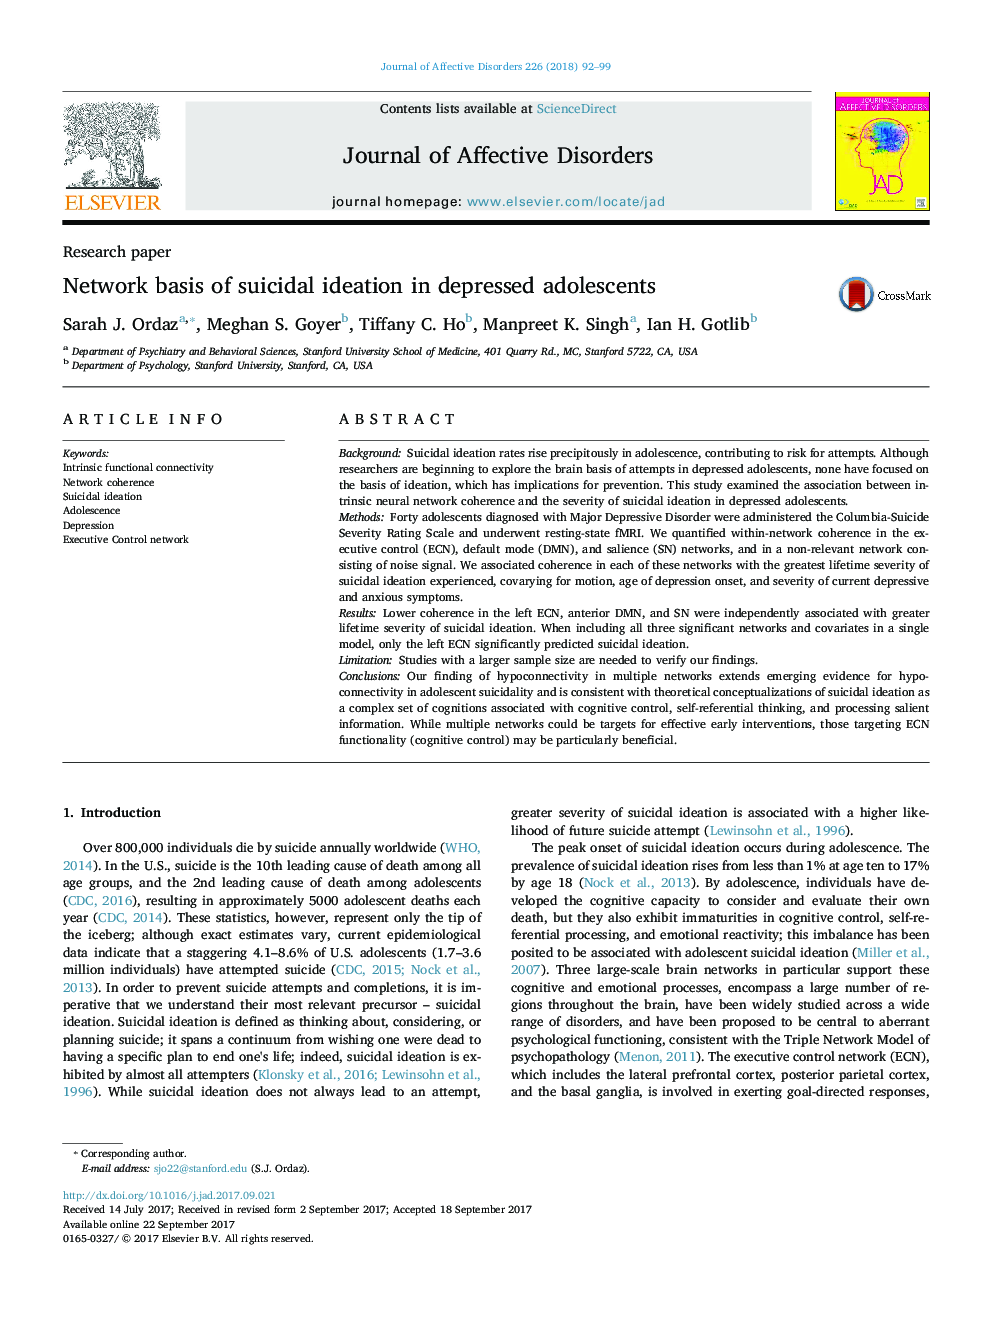 Research paperNetwork basis of suicidal ideation in depressed adolescents